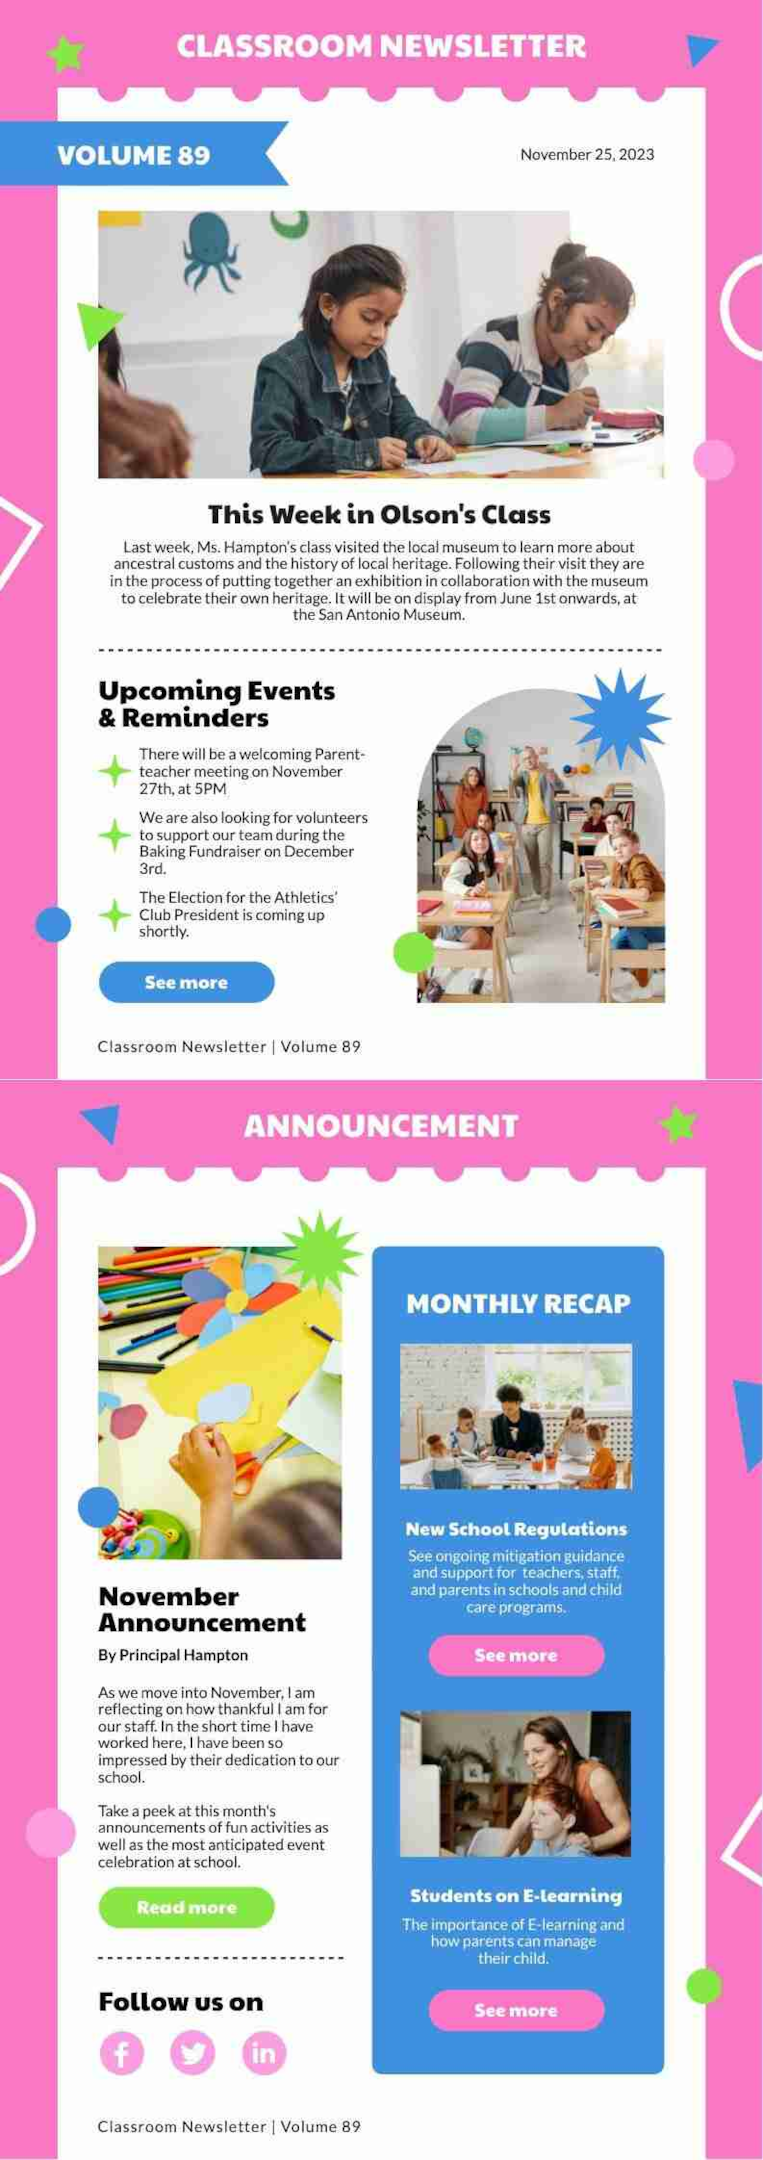 classroom newsletter flyer template with an unconventional size